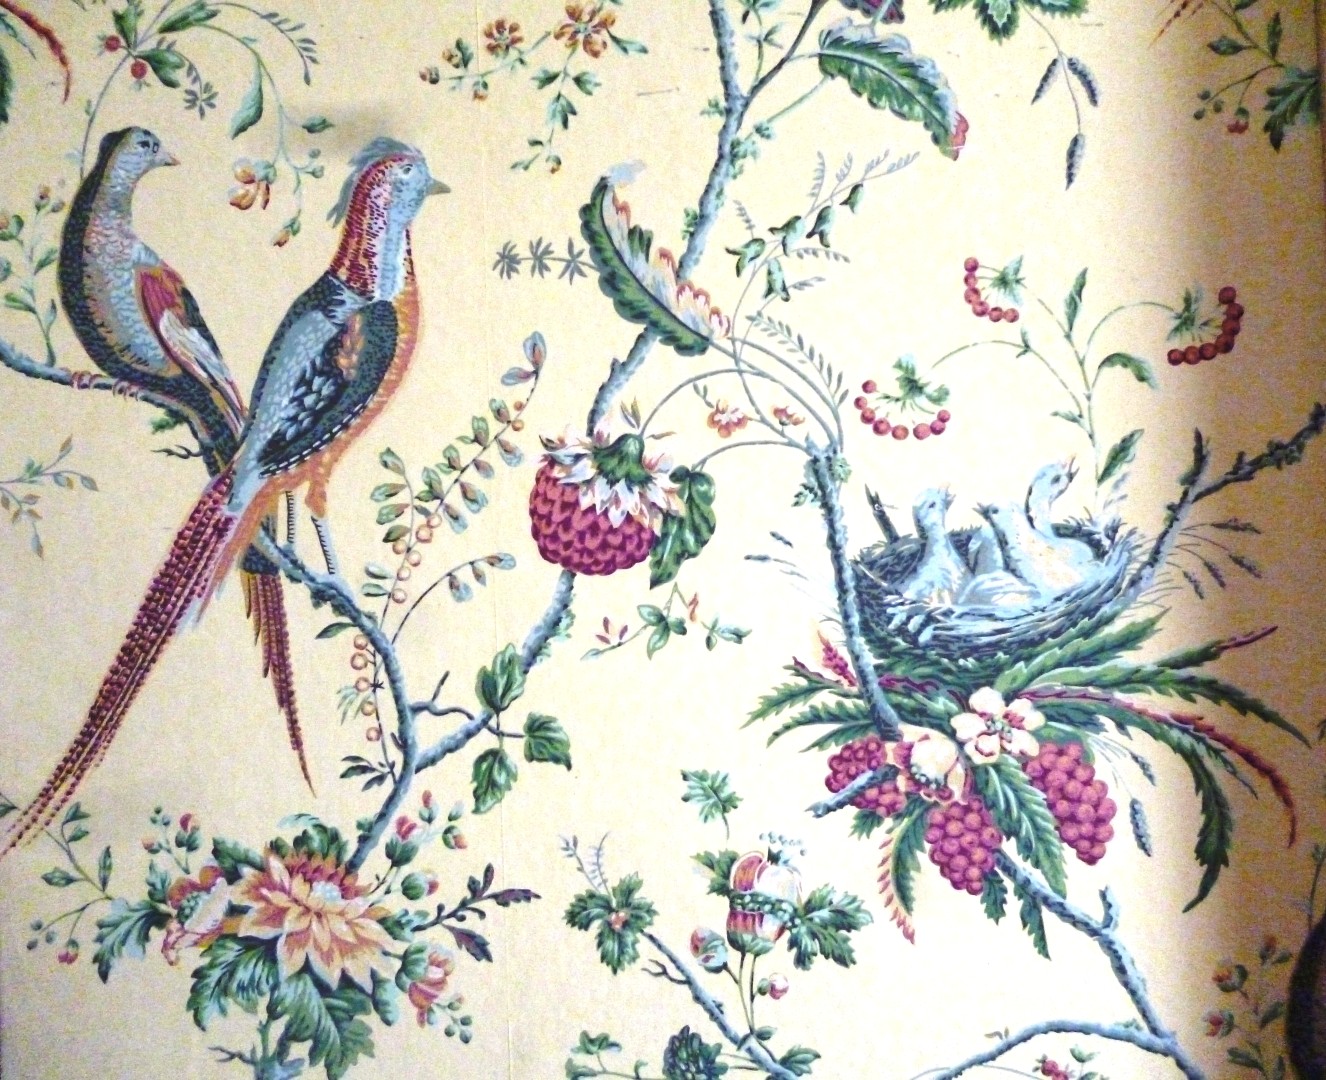 old fashioned wallpaper,botany,bird,plant,pattern,textile